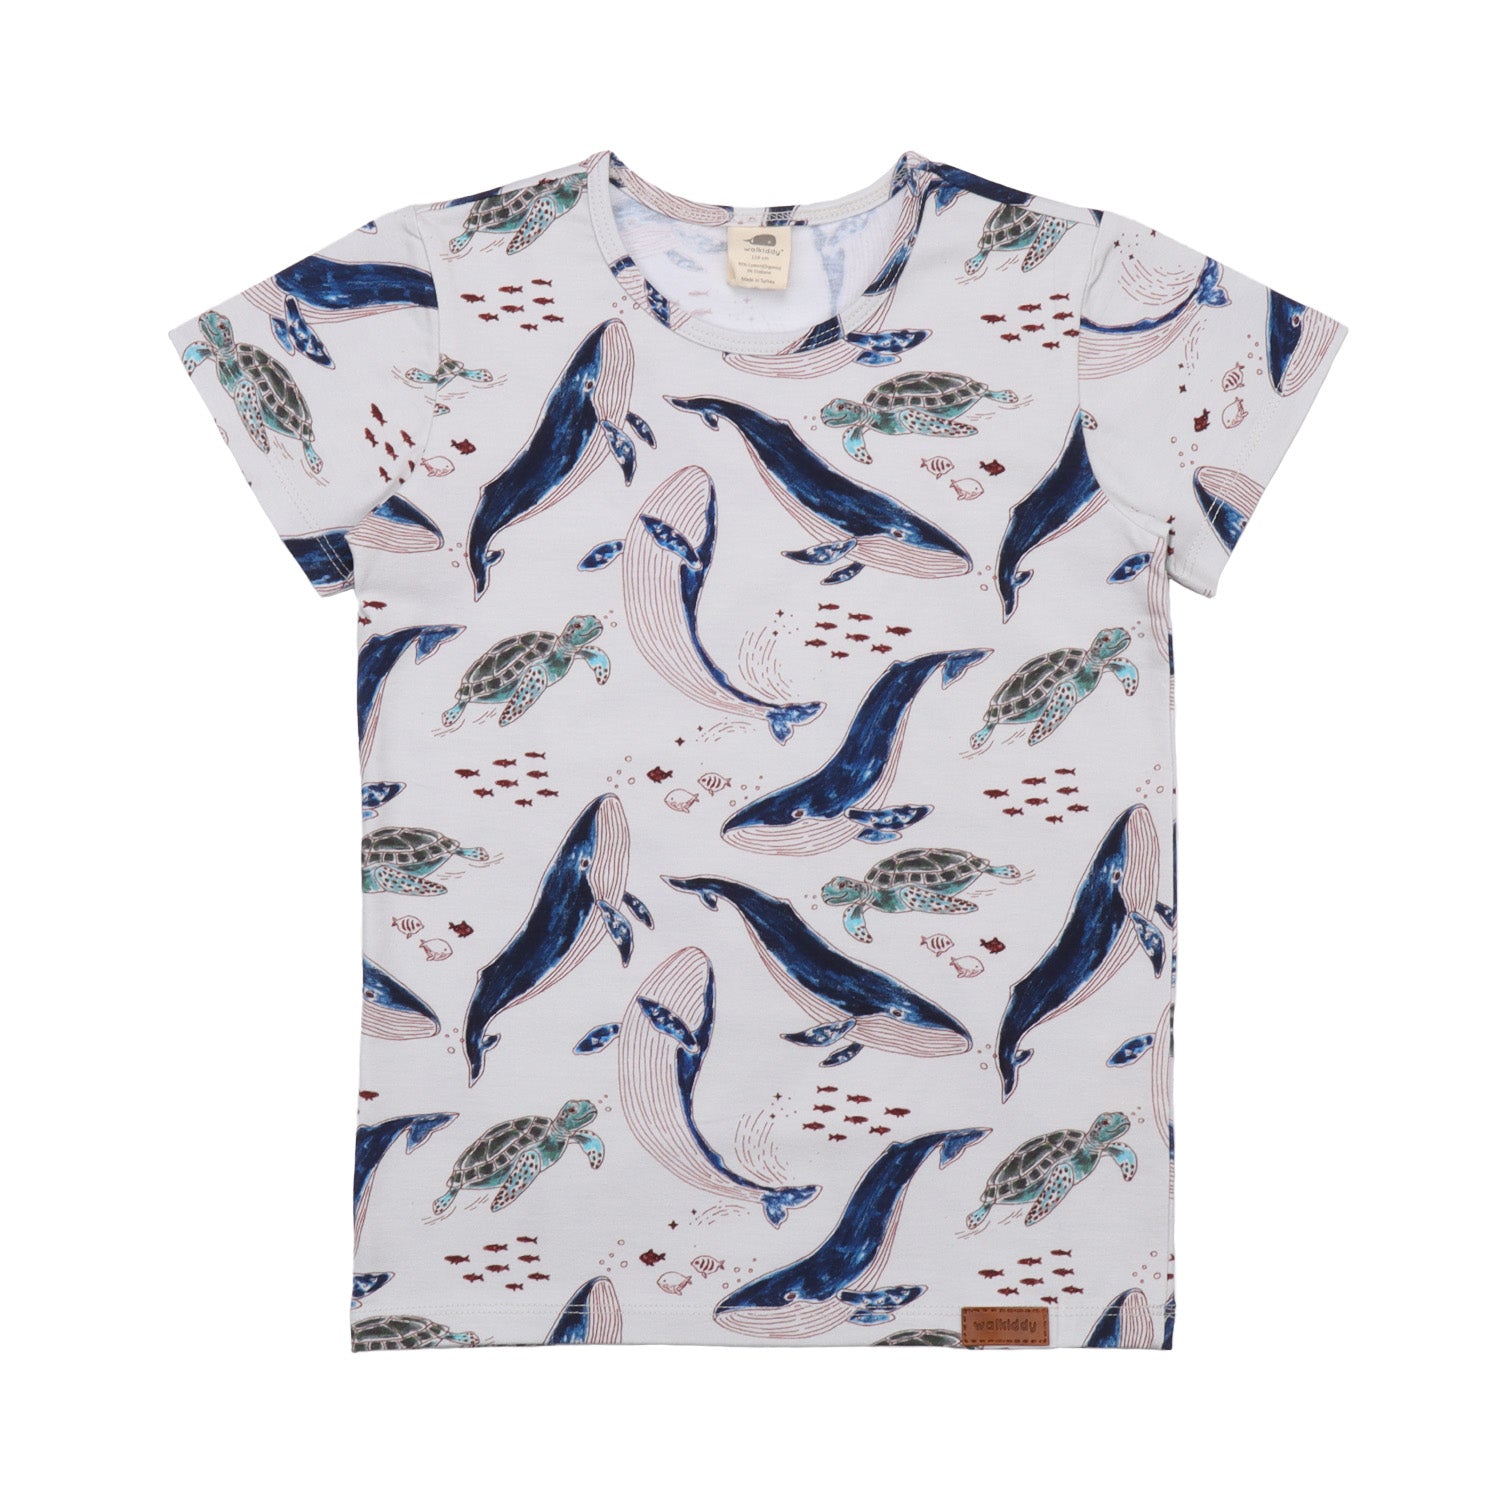 Walkiddy T-Shirt SS Whale & Sea Turtles